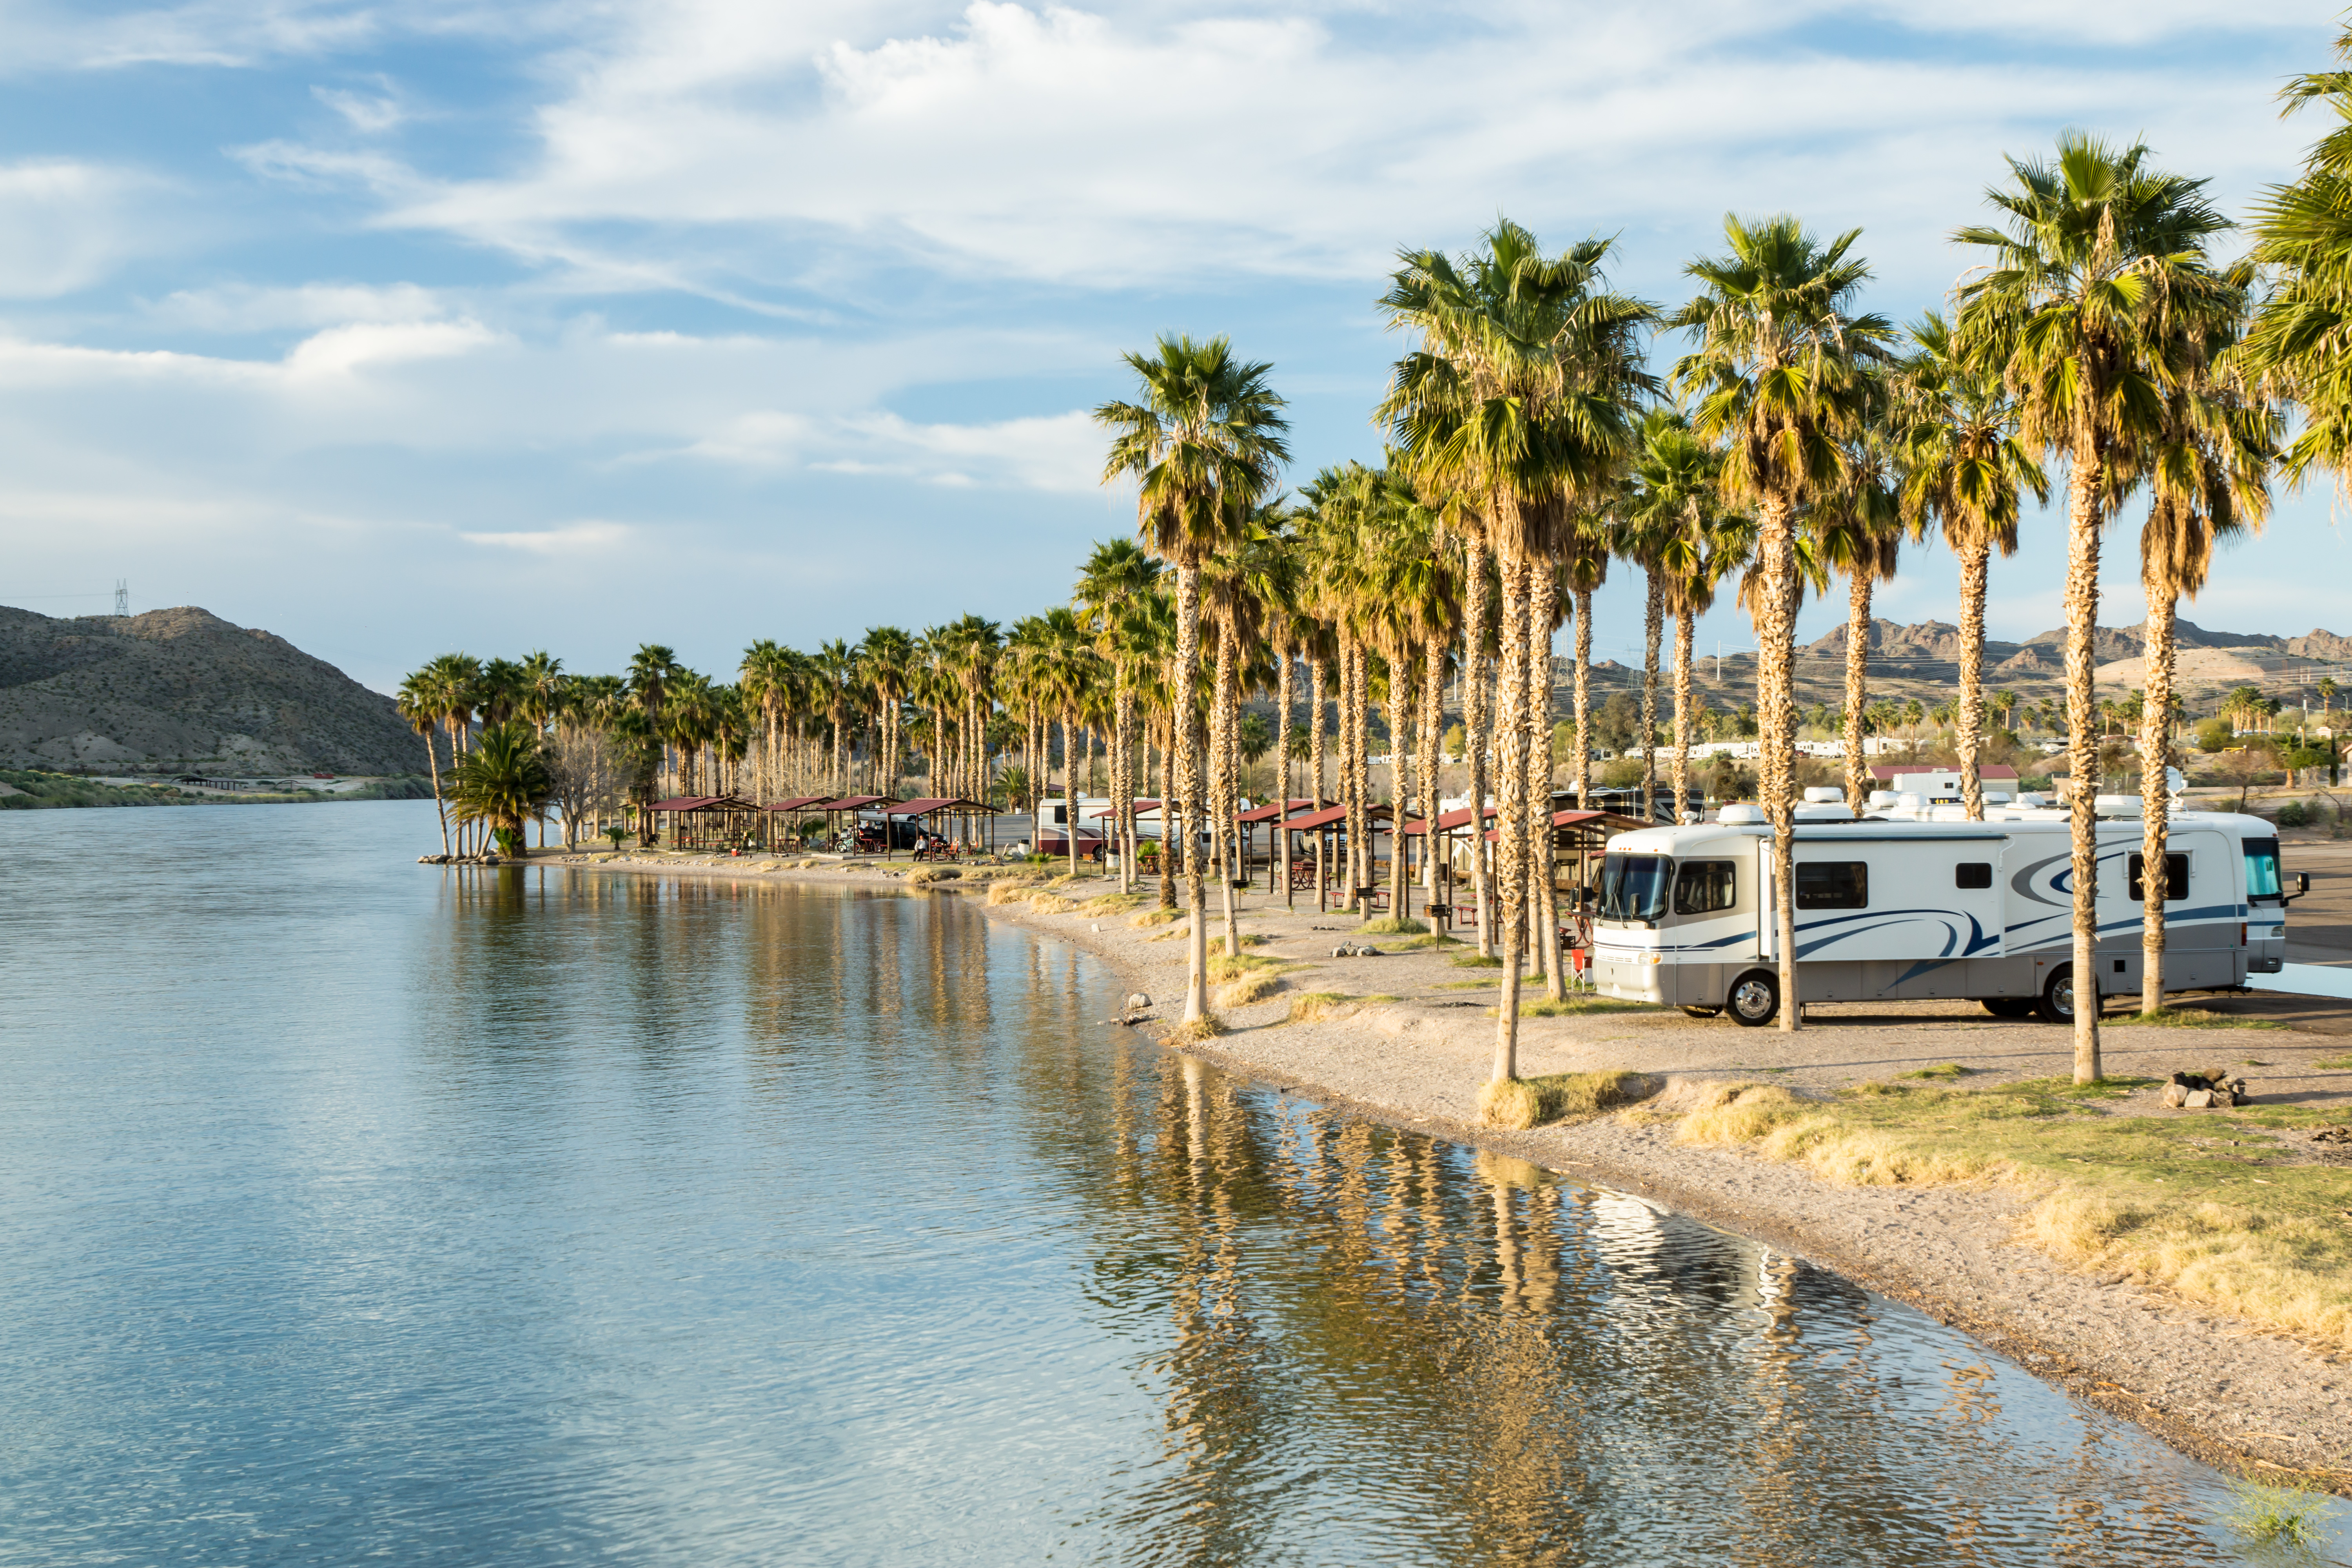 Motorhome parked on a river bank under a row of palm trees.